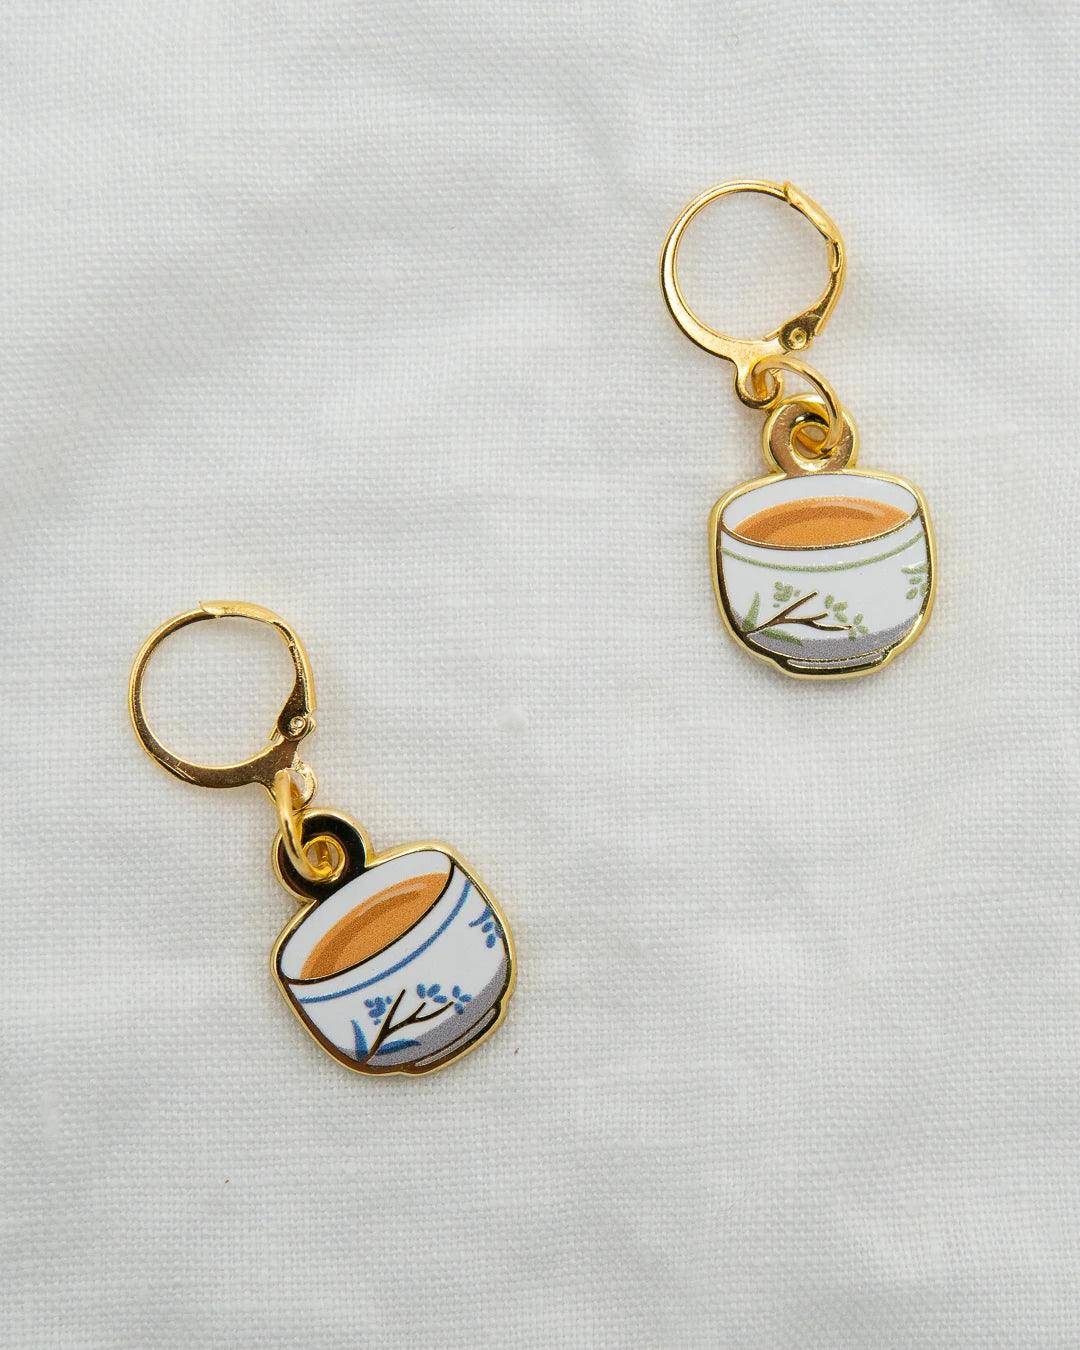 Tea Cup Stitch Marker - Aimee Sher Makes